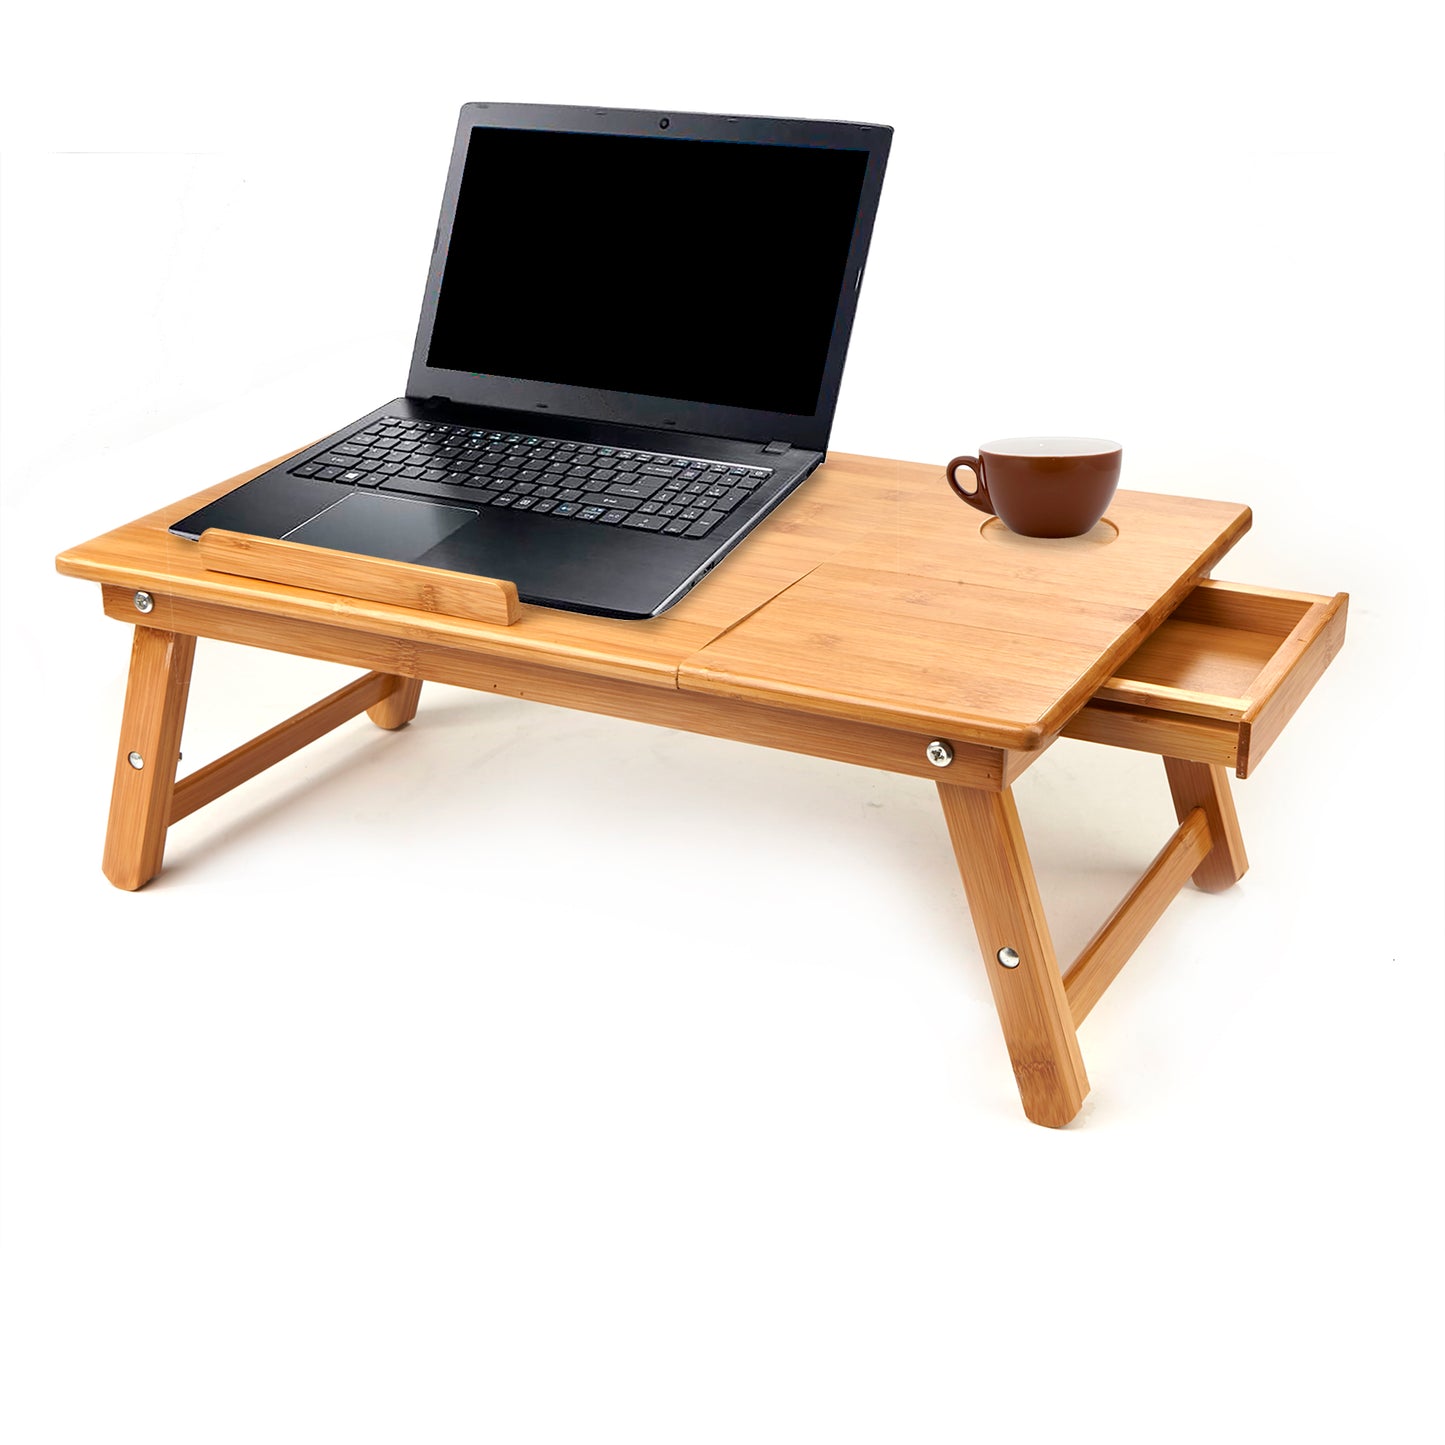 Mind Reader Bali Collection, Bamboo Portable Laptop Desk/Breakfast Table with Tilt Top, Storage Drawer, and Folding Legs, 21.22"L x 13.19"W x 8.86"H, Brown